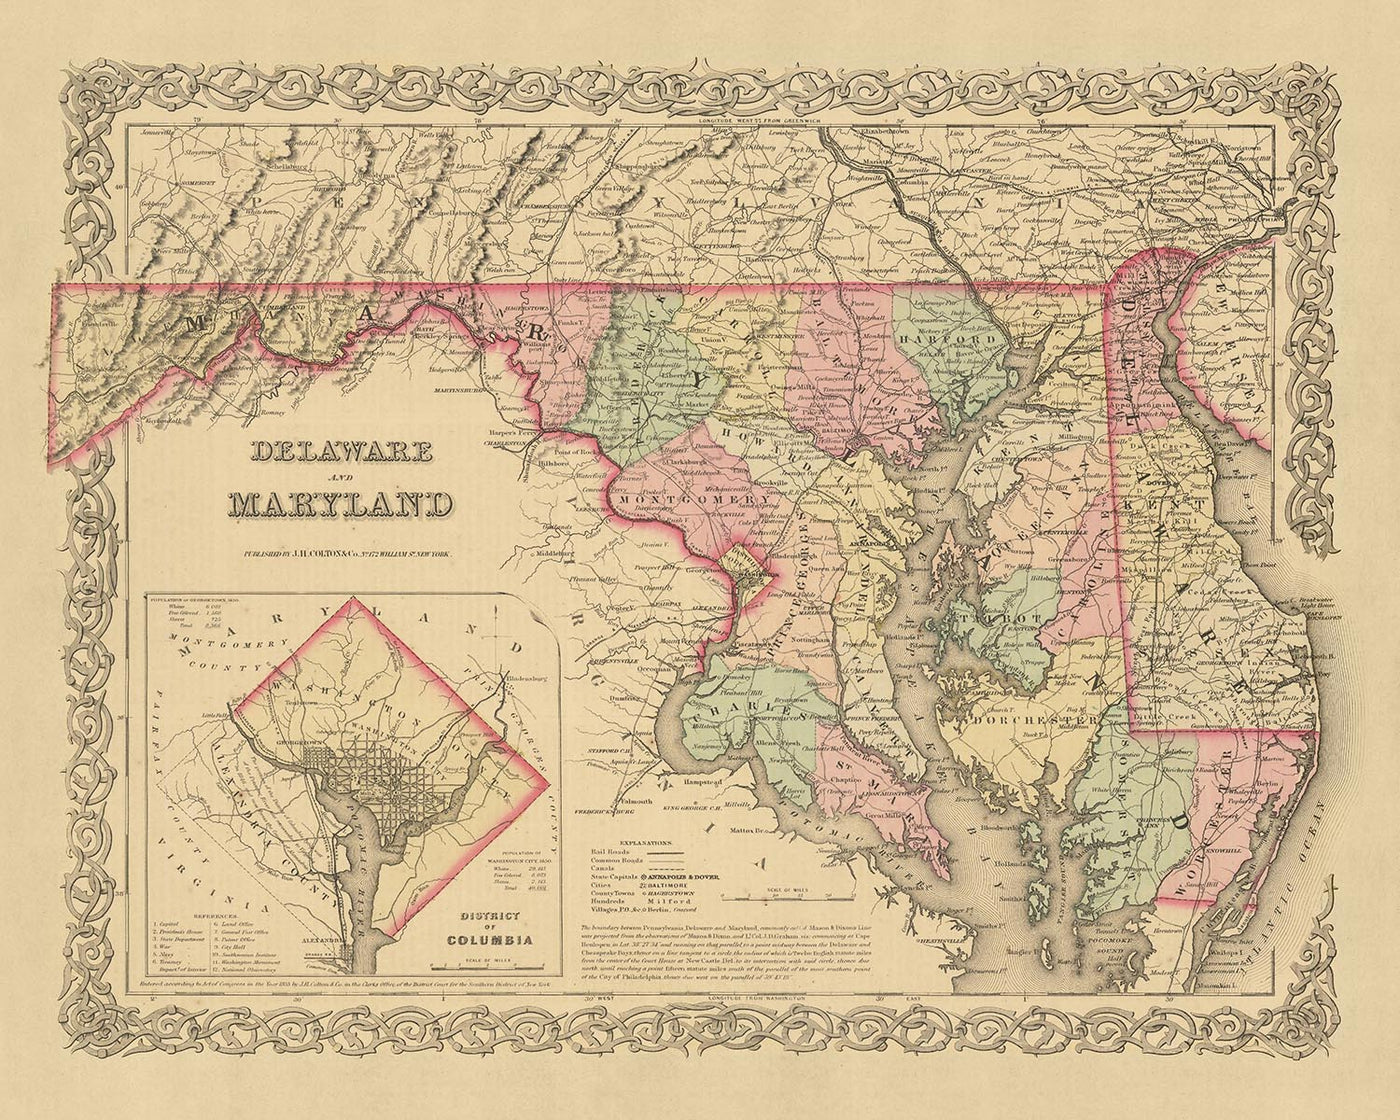 Old Map of Delaware, Maryland & Washington D.C. by J.H. Colton, 1859: Wilmington, Baltimore, Annapolis, Dover